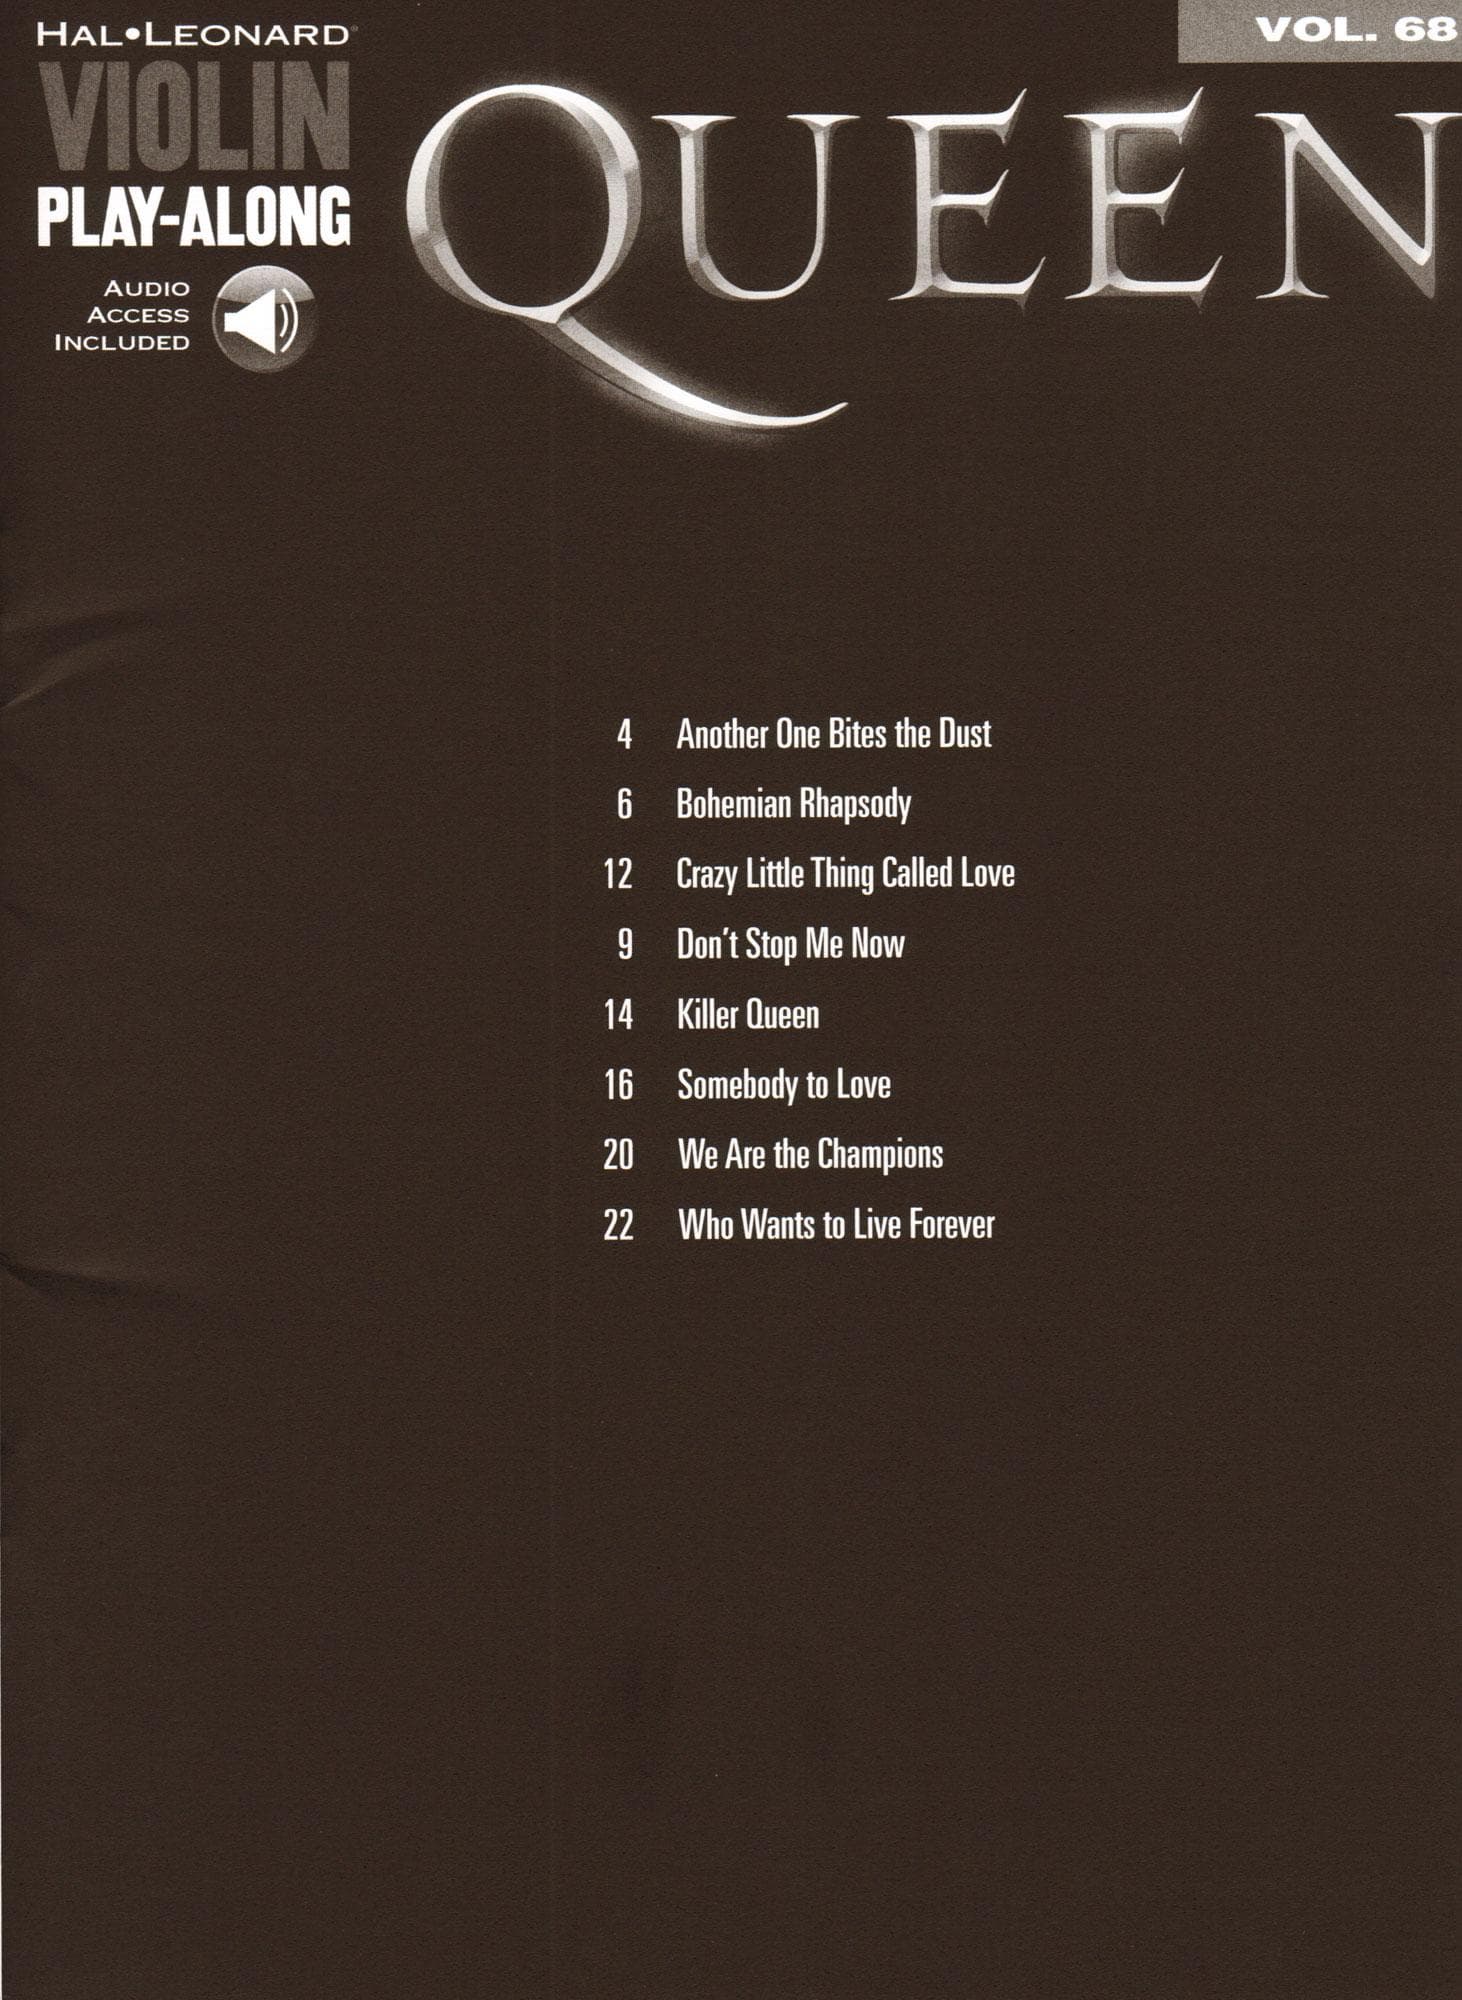 Queen - 8 Favorites - Violin Play-Along Vol. 68 - for Violin with Audio Accompaniment - Hal Leonard